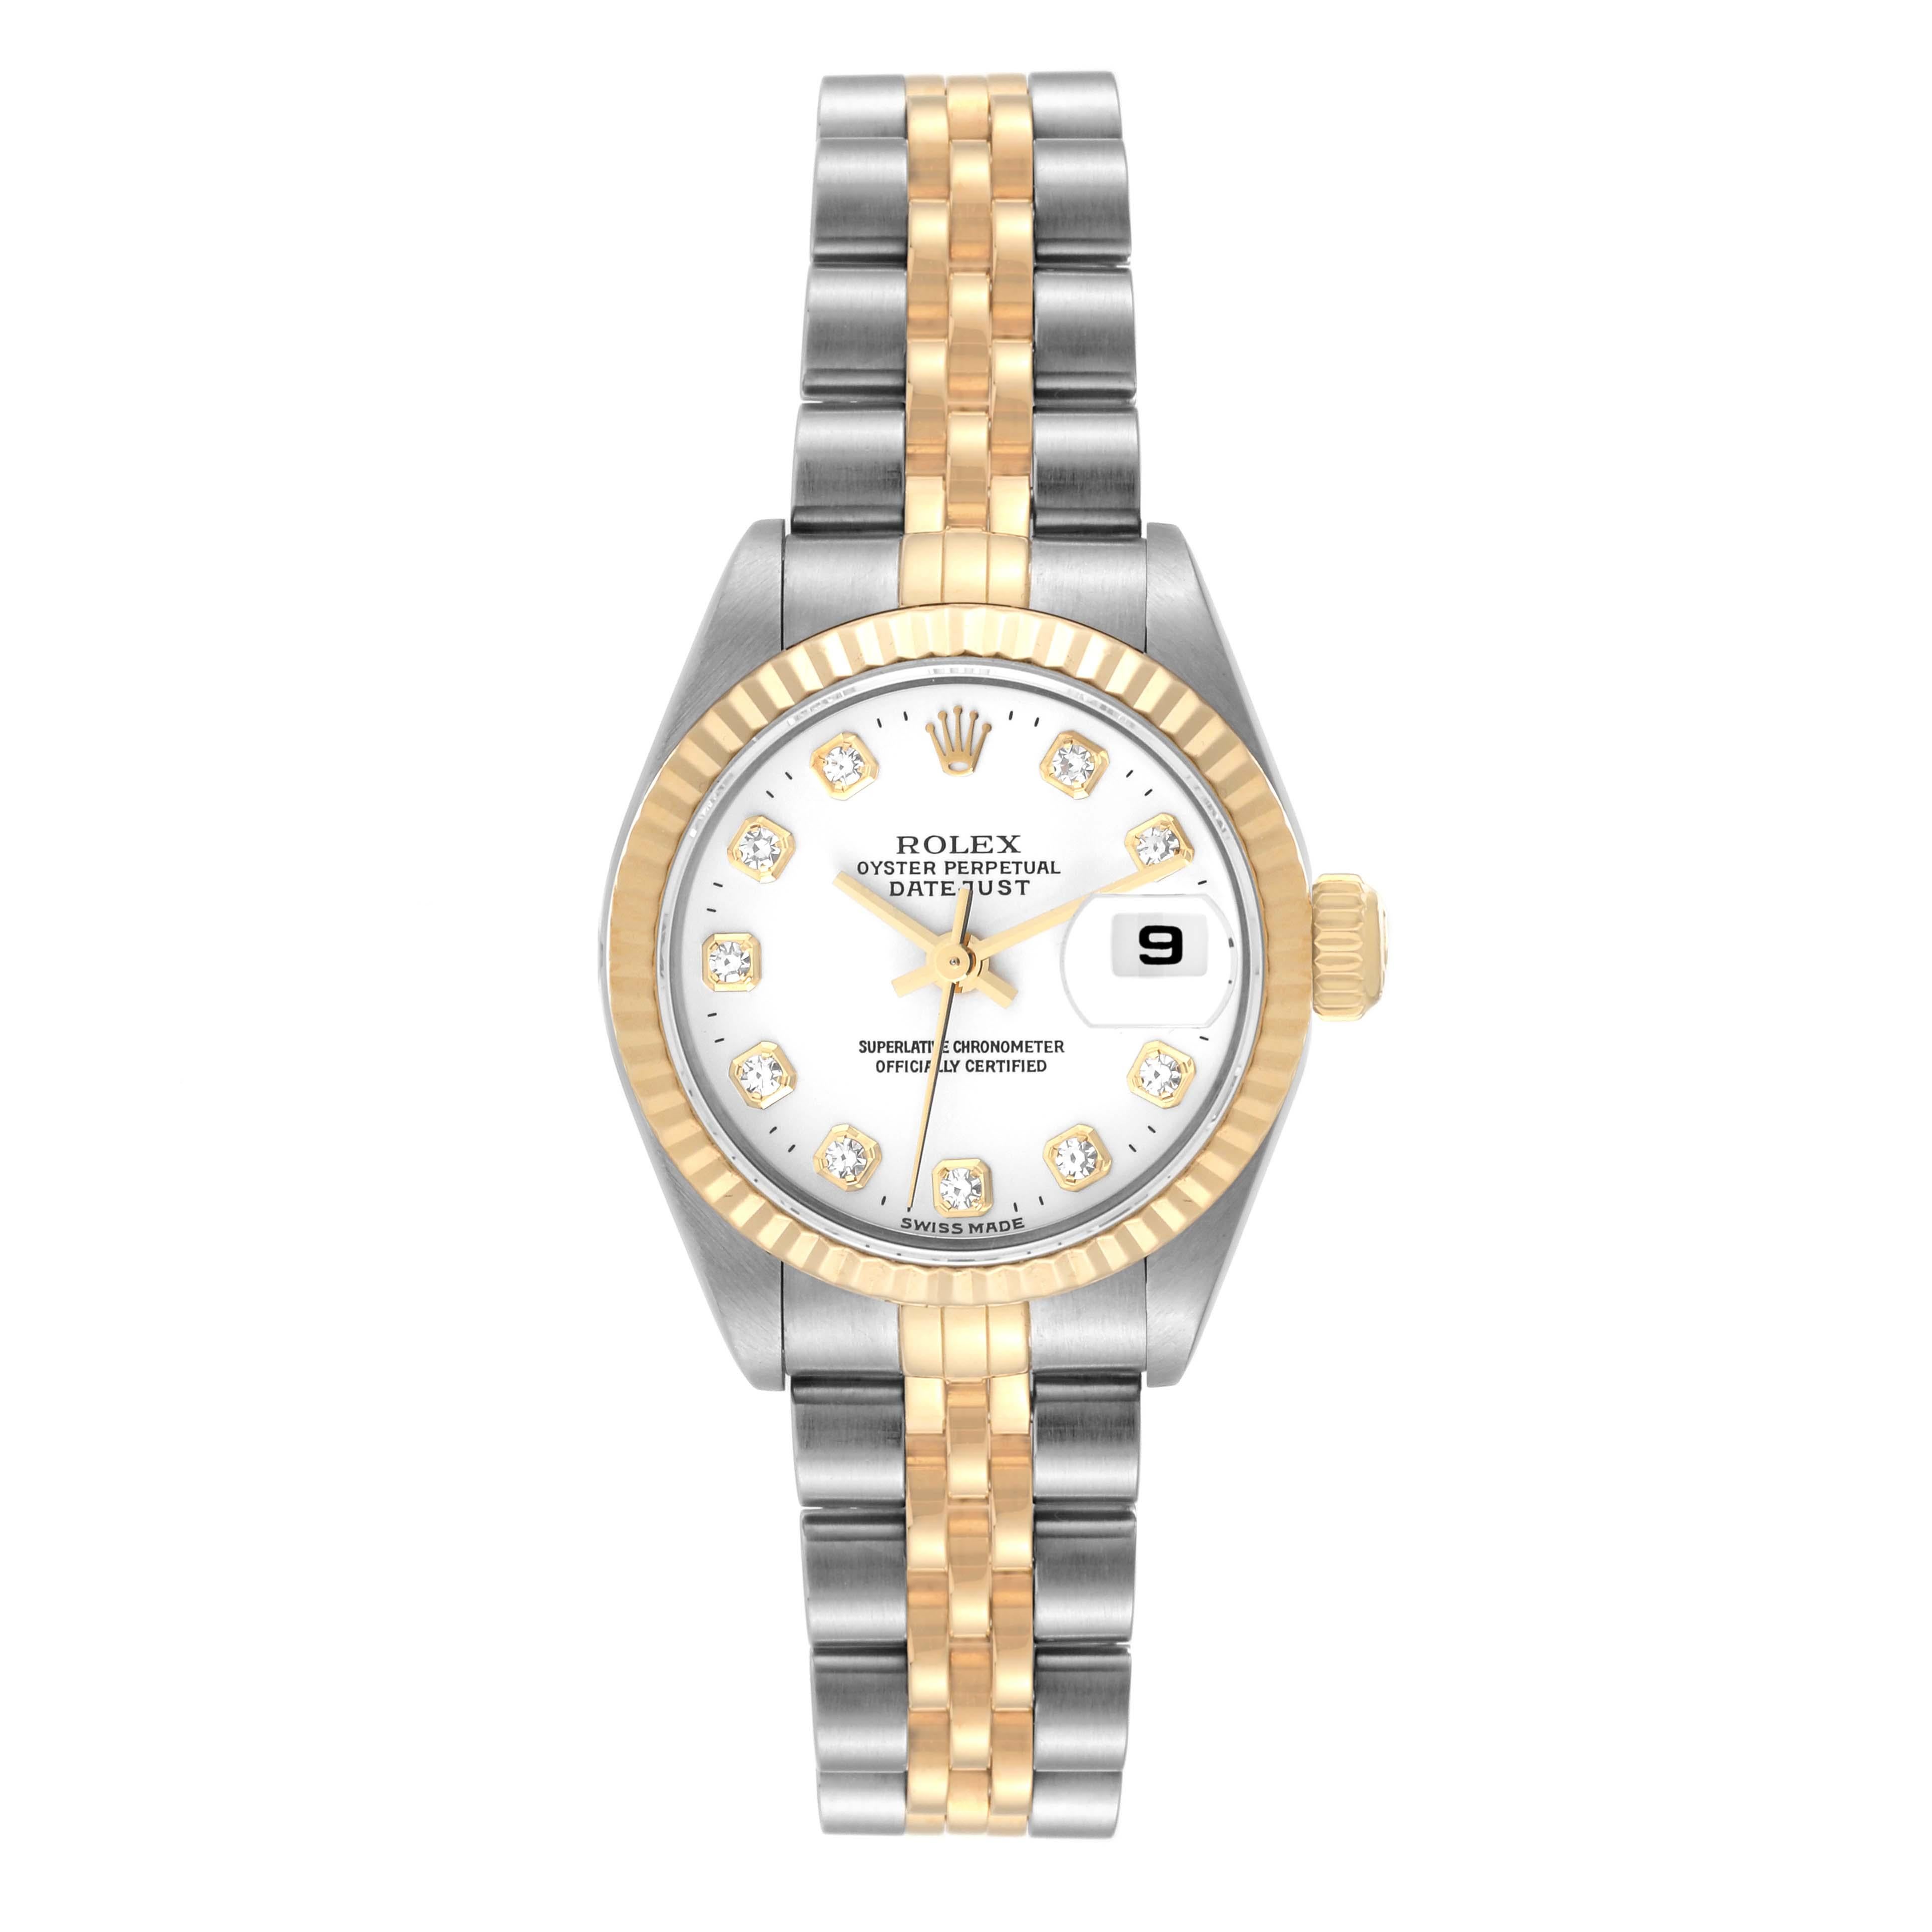 Rolex Datejust Steel Yellow Gold White Diamond Dial Ladies Watch 79173 Box Paper. Officially certified chronometer automatic self-winding movement. Stainless steel oyster case 26.0 mm in diameter. Rolex logo on an 18K yellow gold crown. 18k yellow